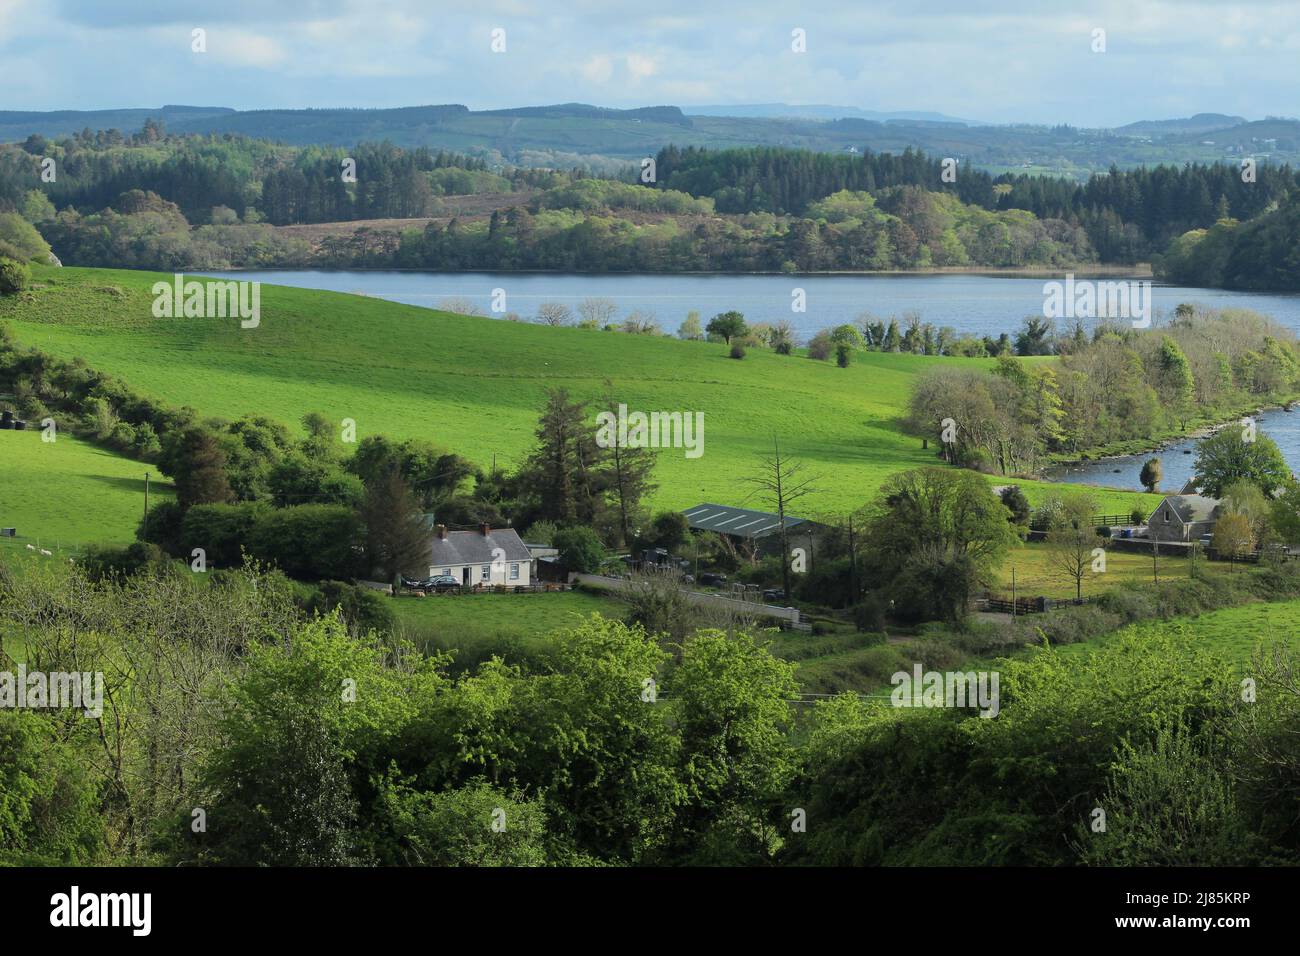 Landscape of rural County Leitrim, Ireland at shores of Lough Gill during summertime featuring cottage nestled amongst fields and trees Stock Photo